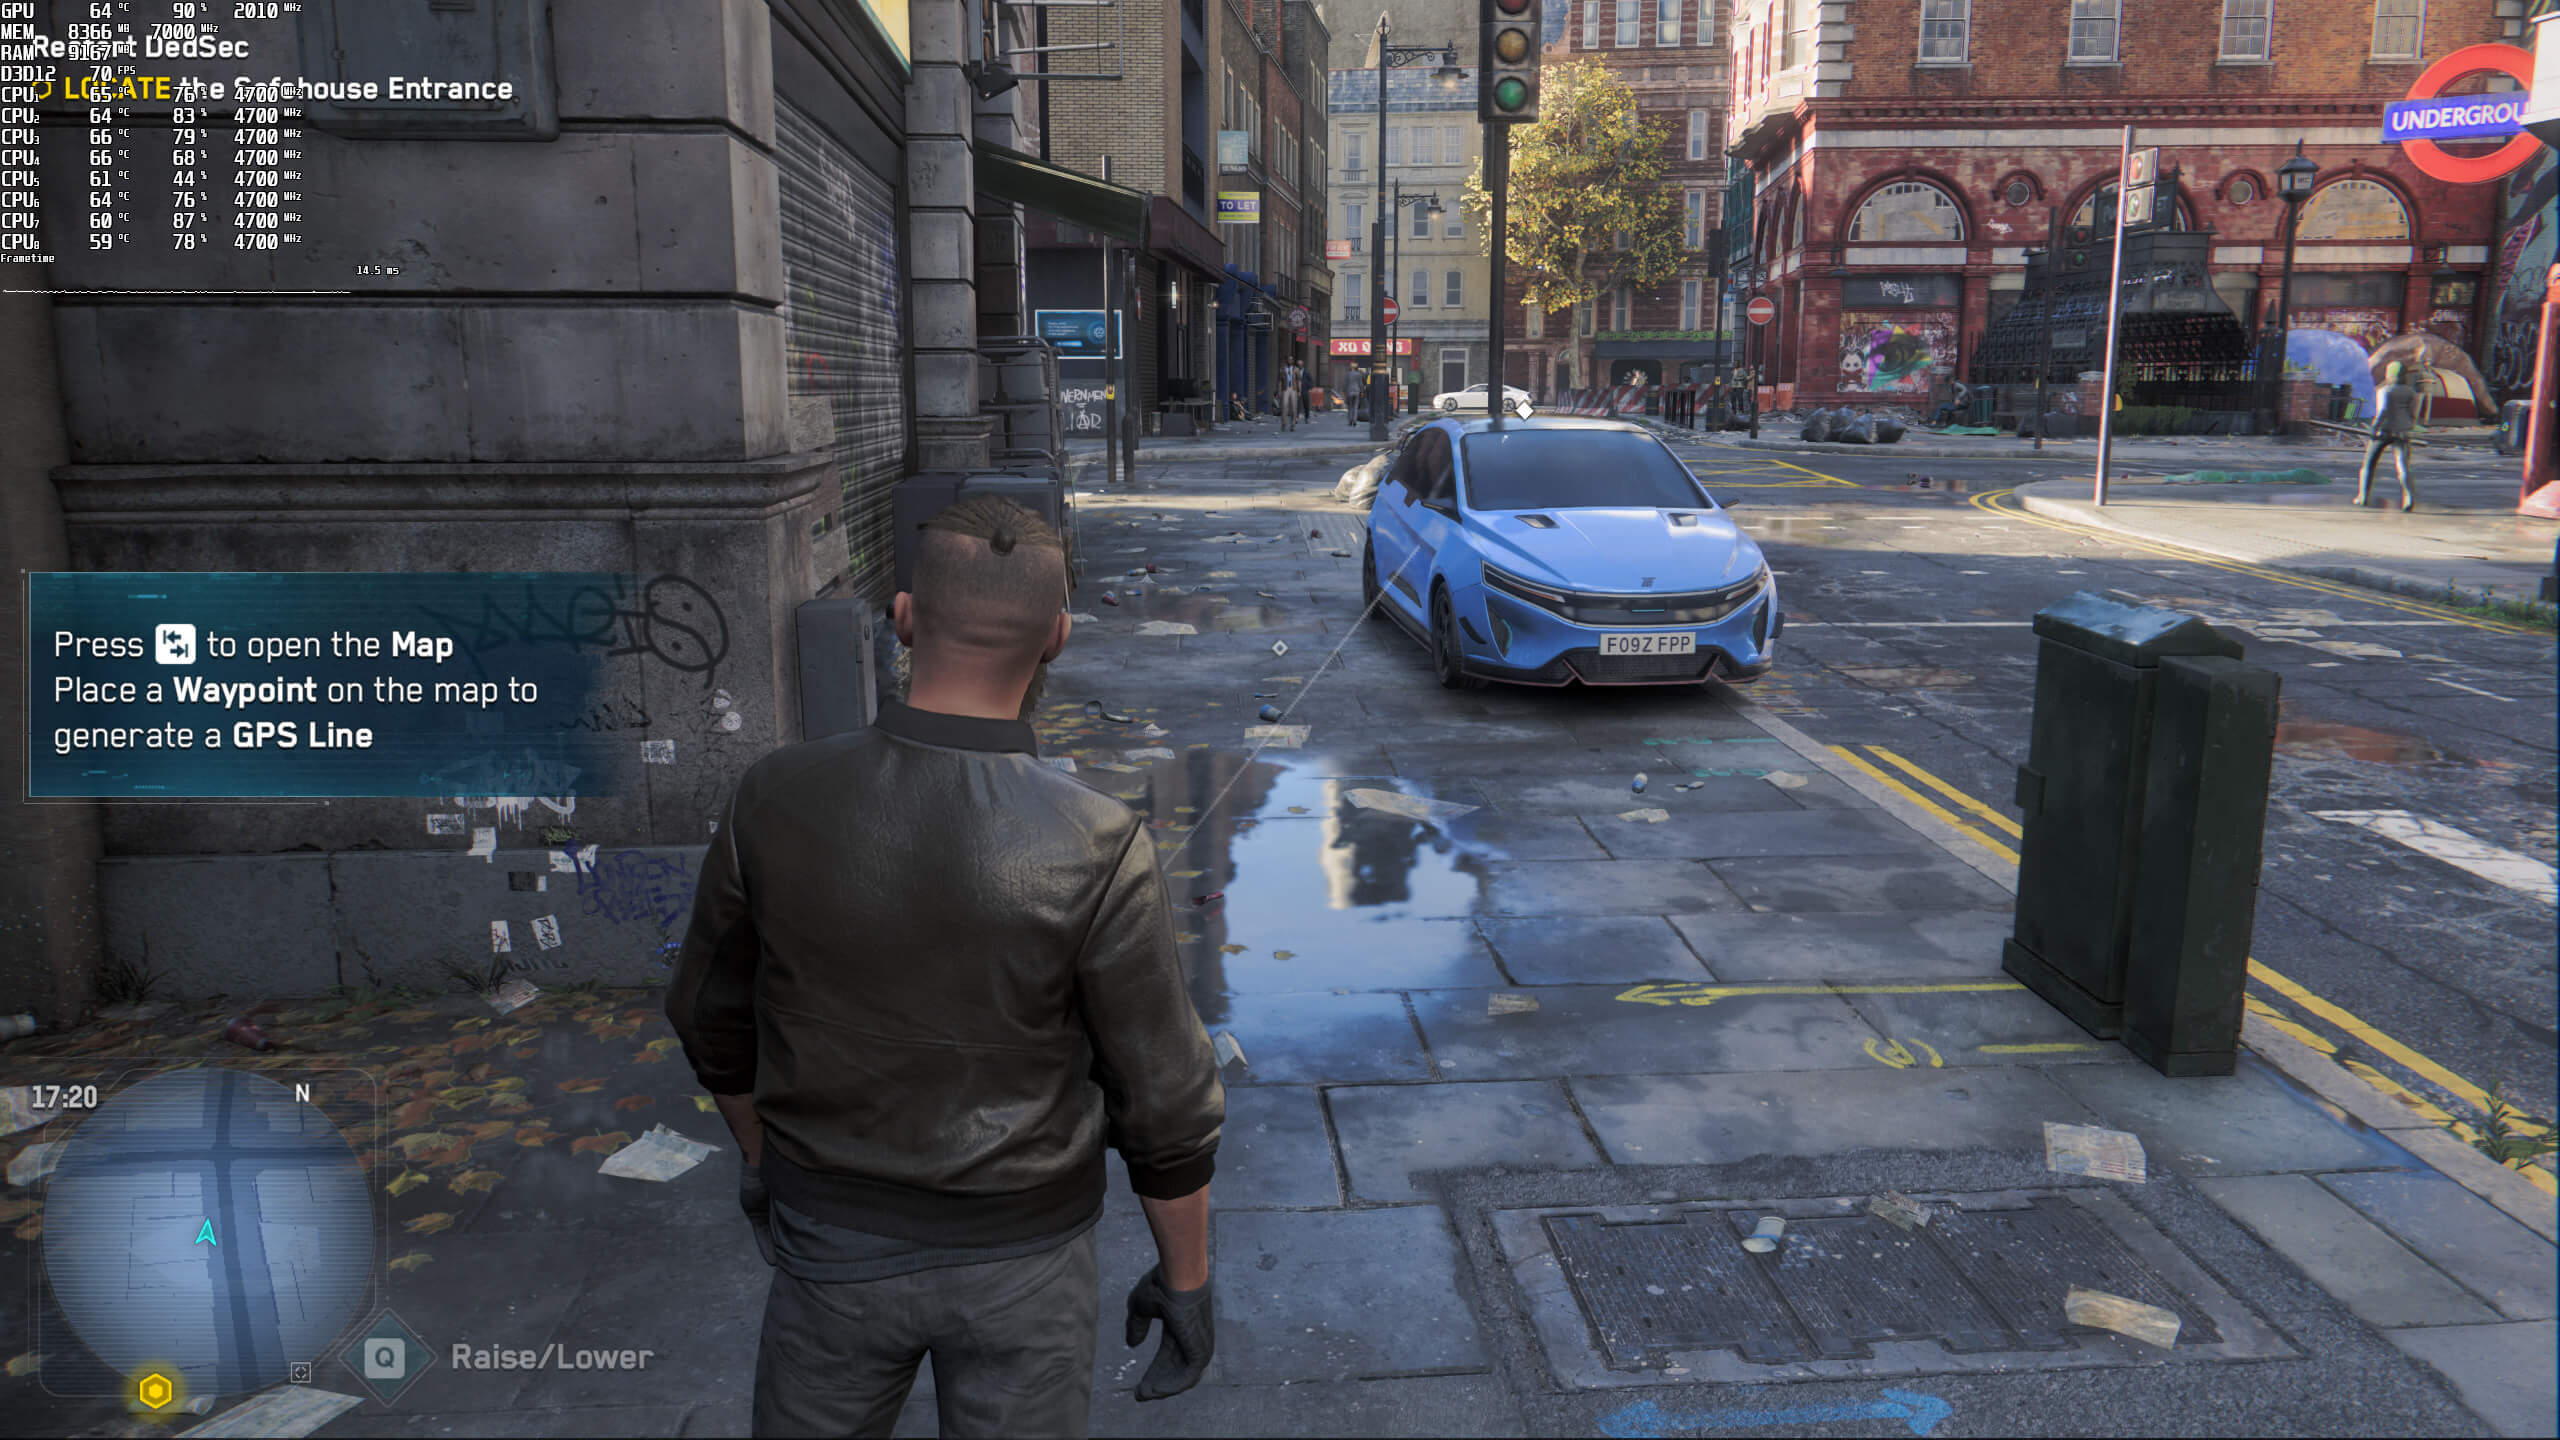 Watch Dogs: Legion Benchmarked at 1080p, 1440p, 4K on all new GPUs